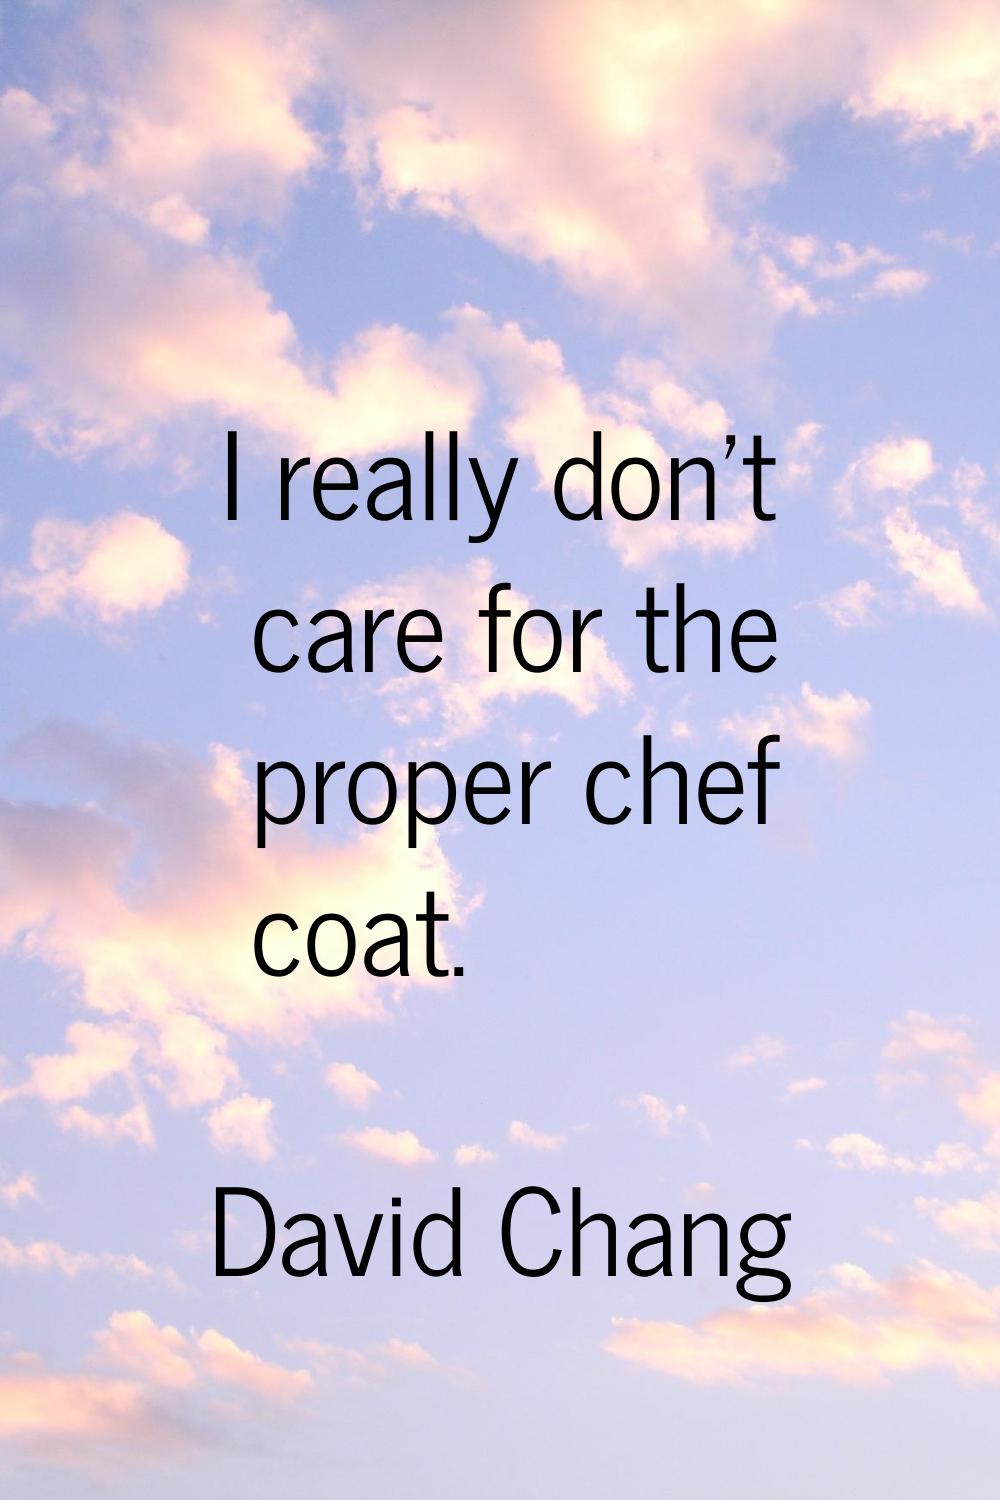 I really don't care for the proper chef coat.